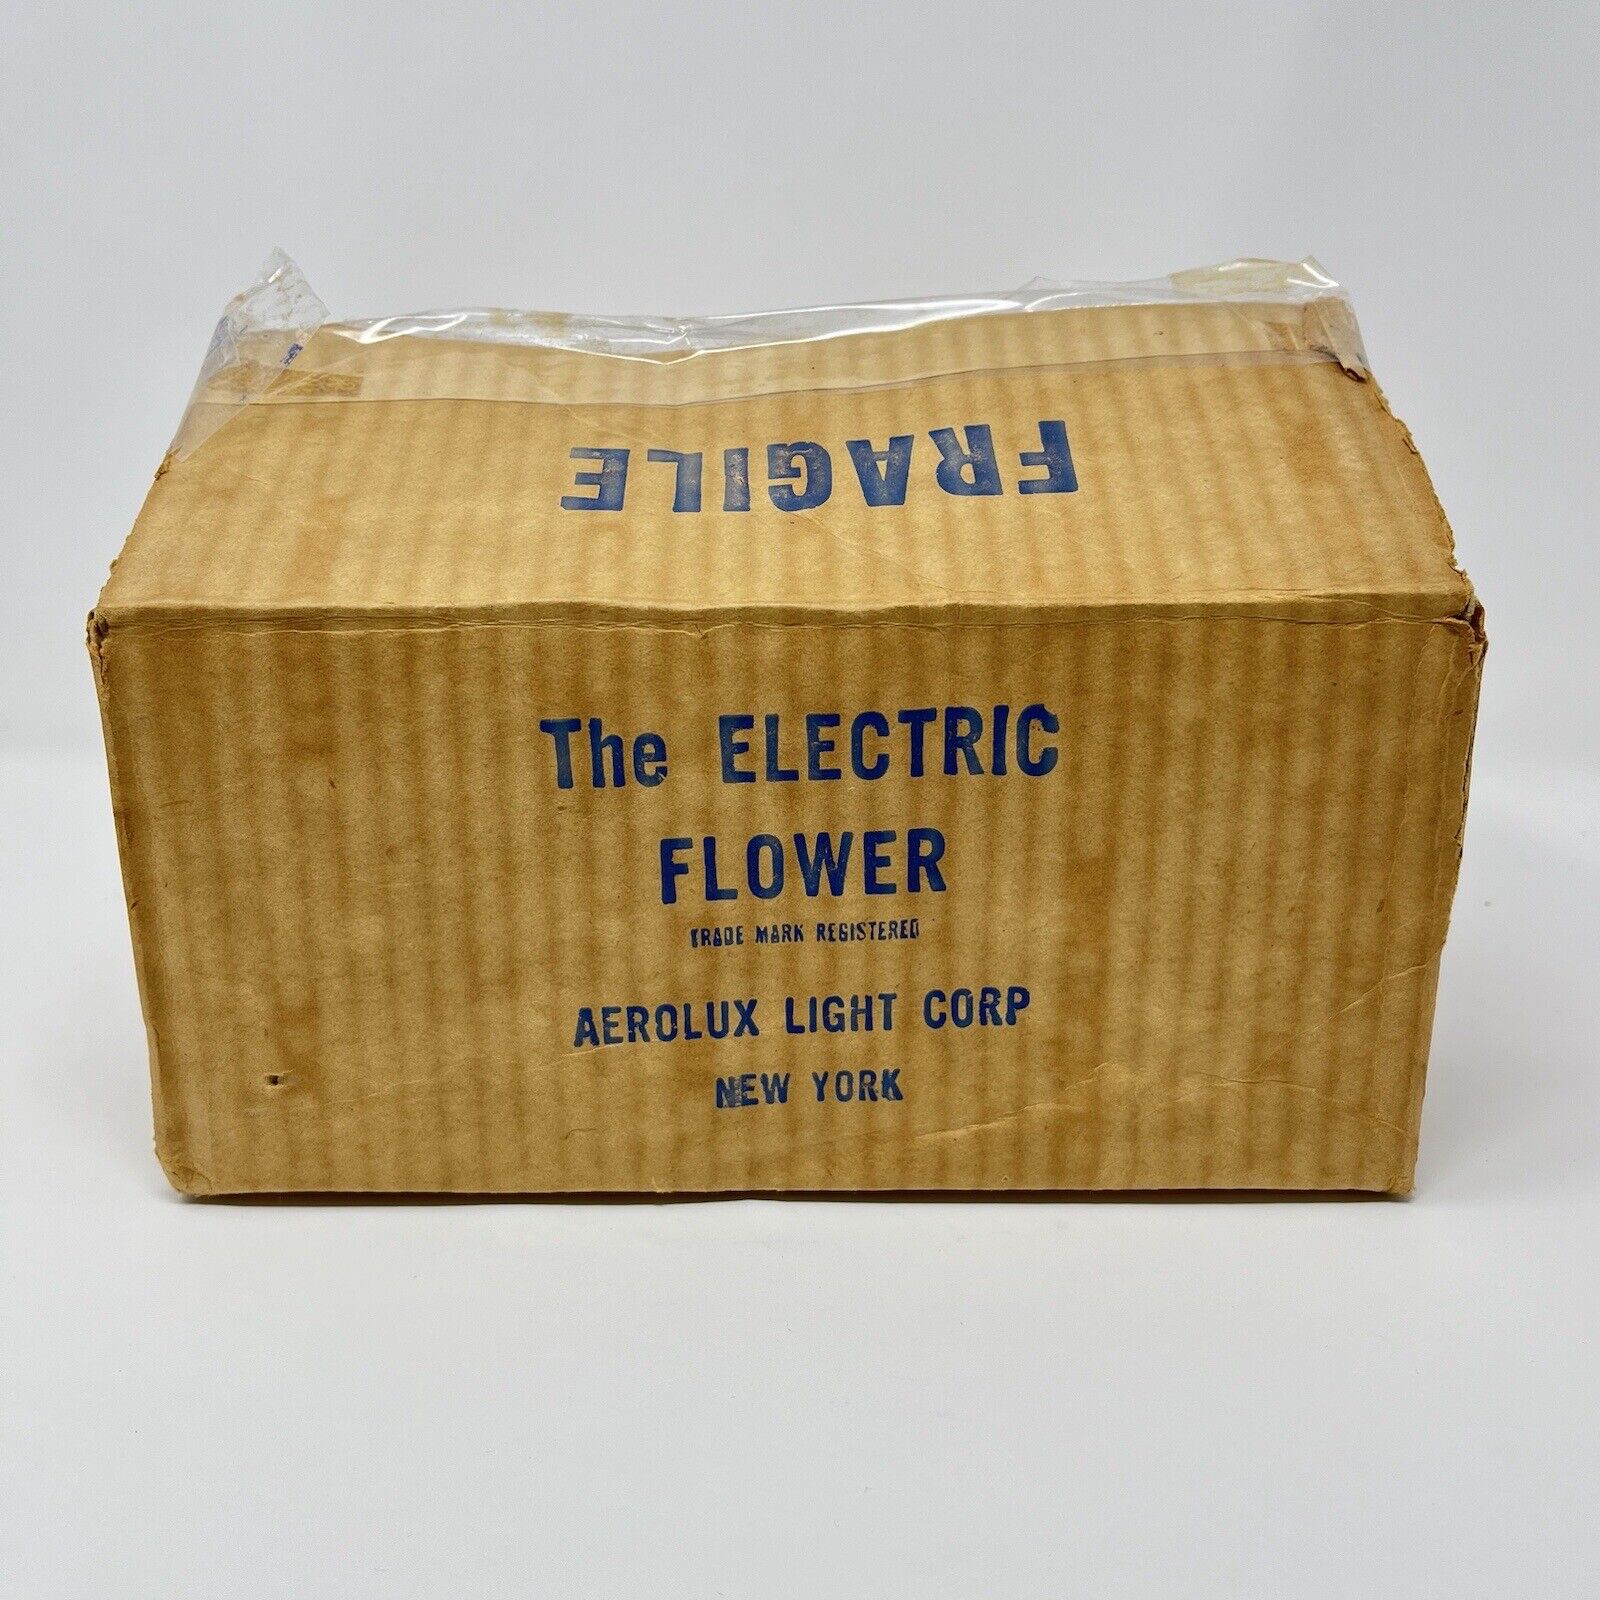 Aerolux Electric Light Corp Original Electric Flower Shipping Box -Vintage 1950s